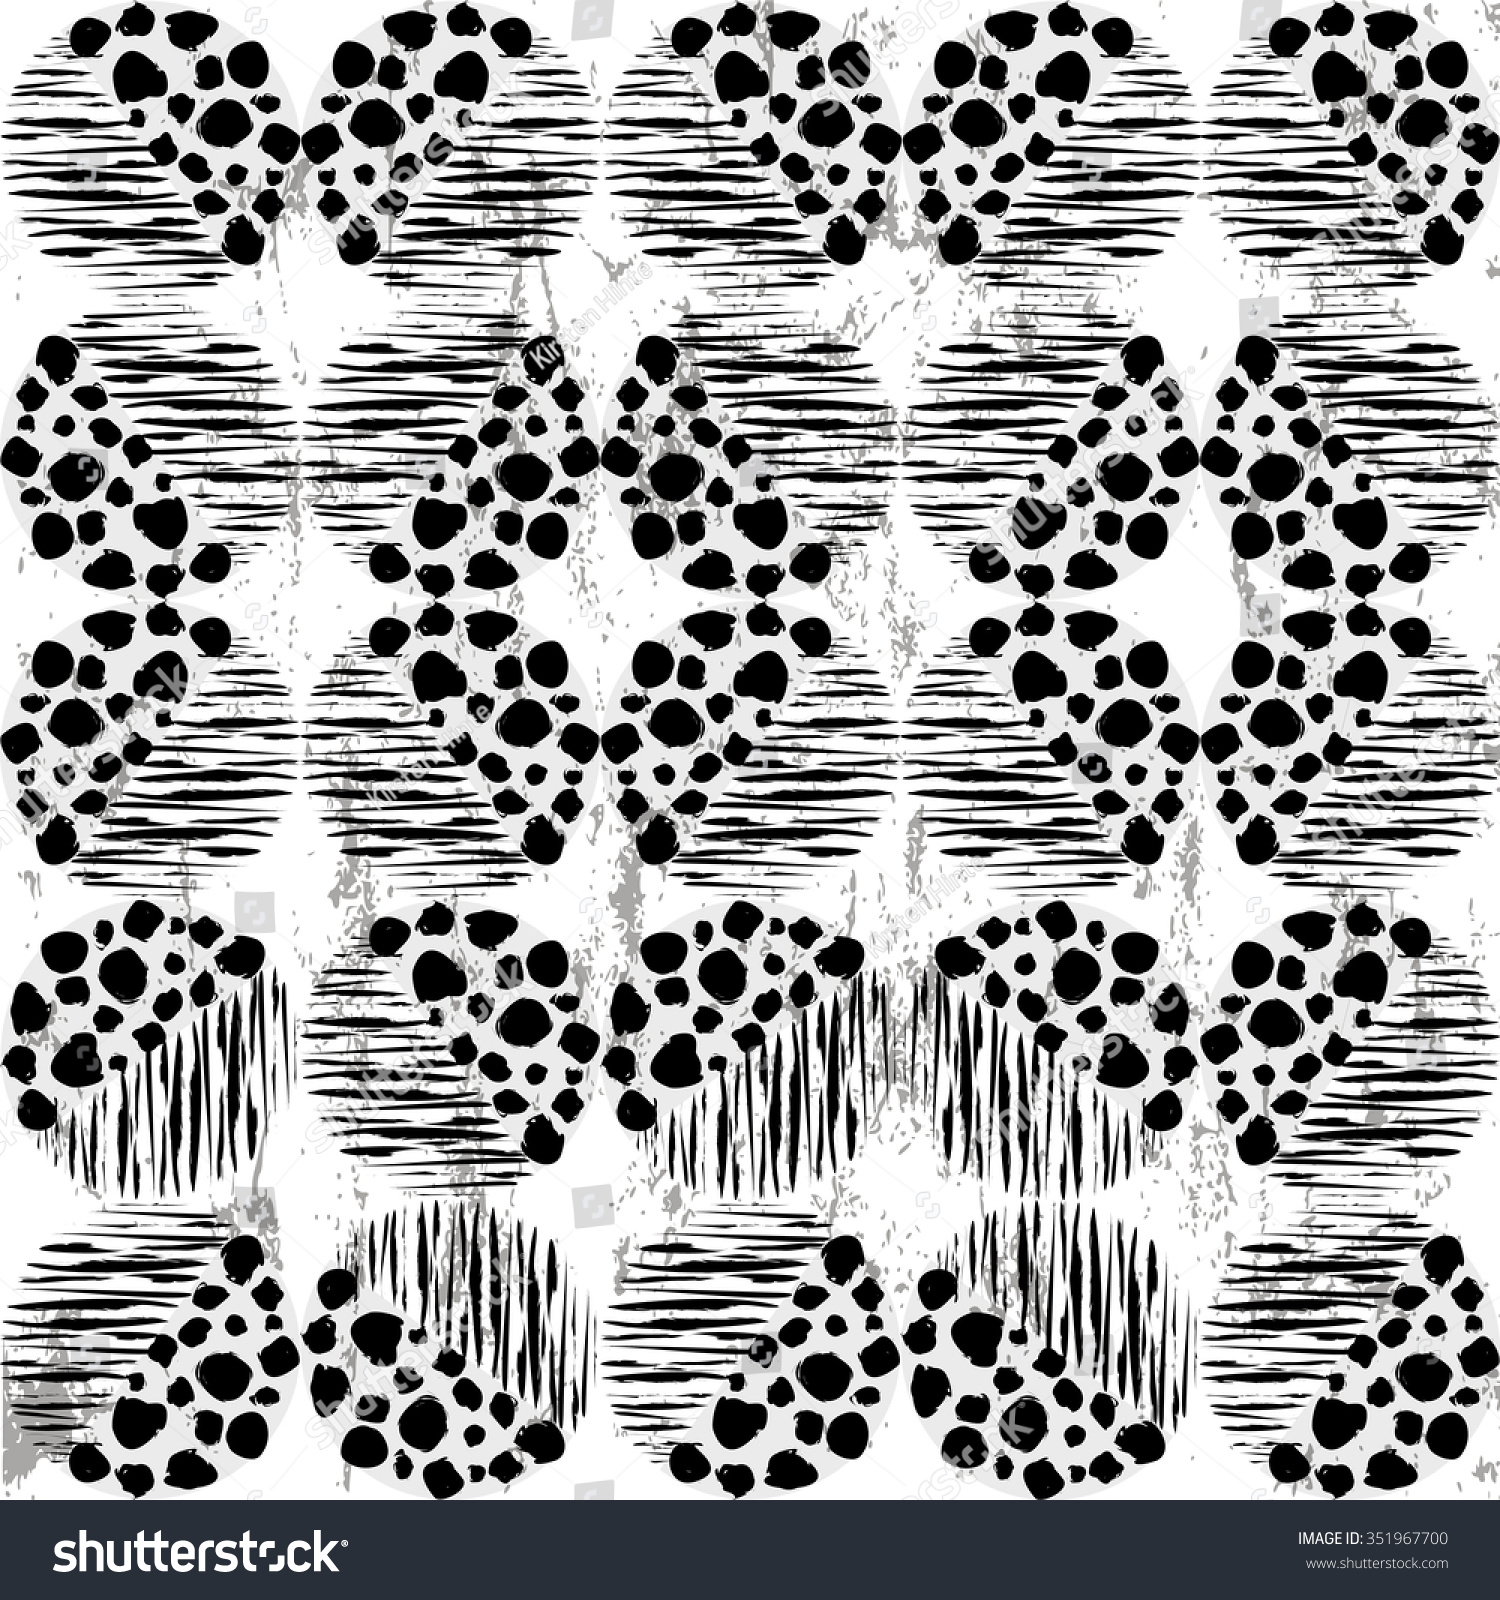 abstract pattern background, retro/vintage style, with circles, strokes and splashes #351967700